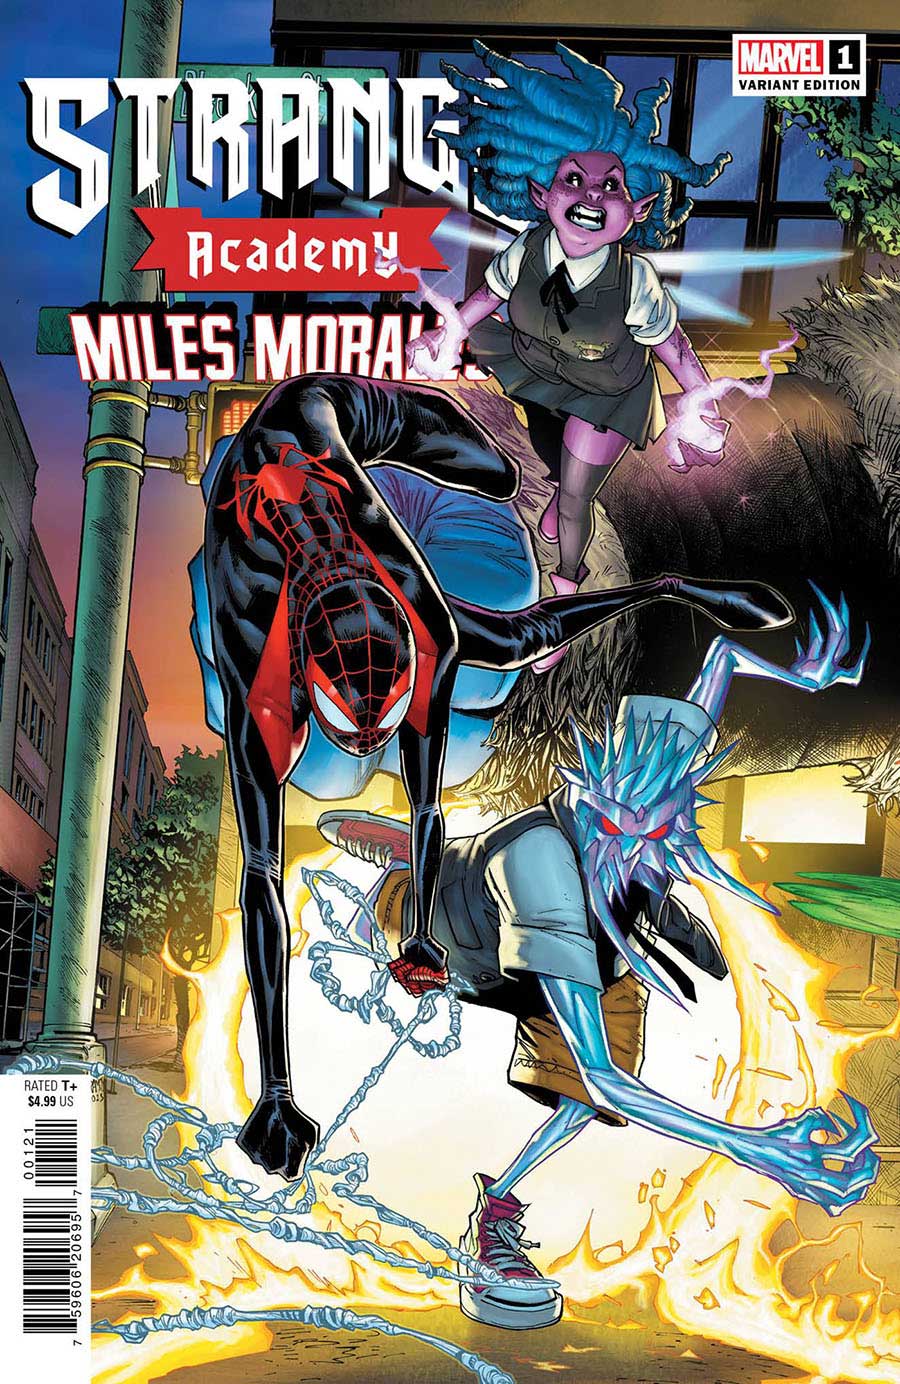 Strange Academy Miles Morales #1 (One Shot) Cover B Variant Humberto Ramos Connecting Cover